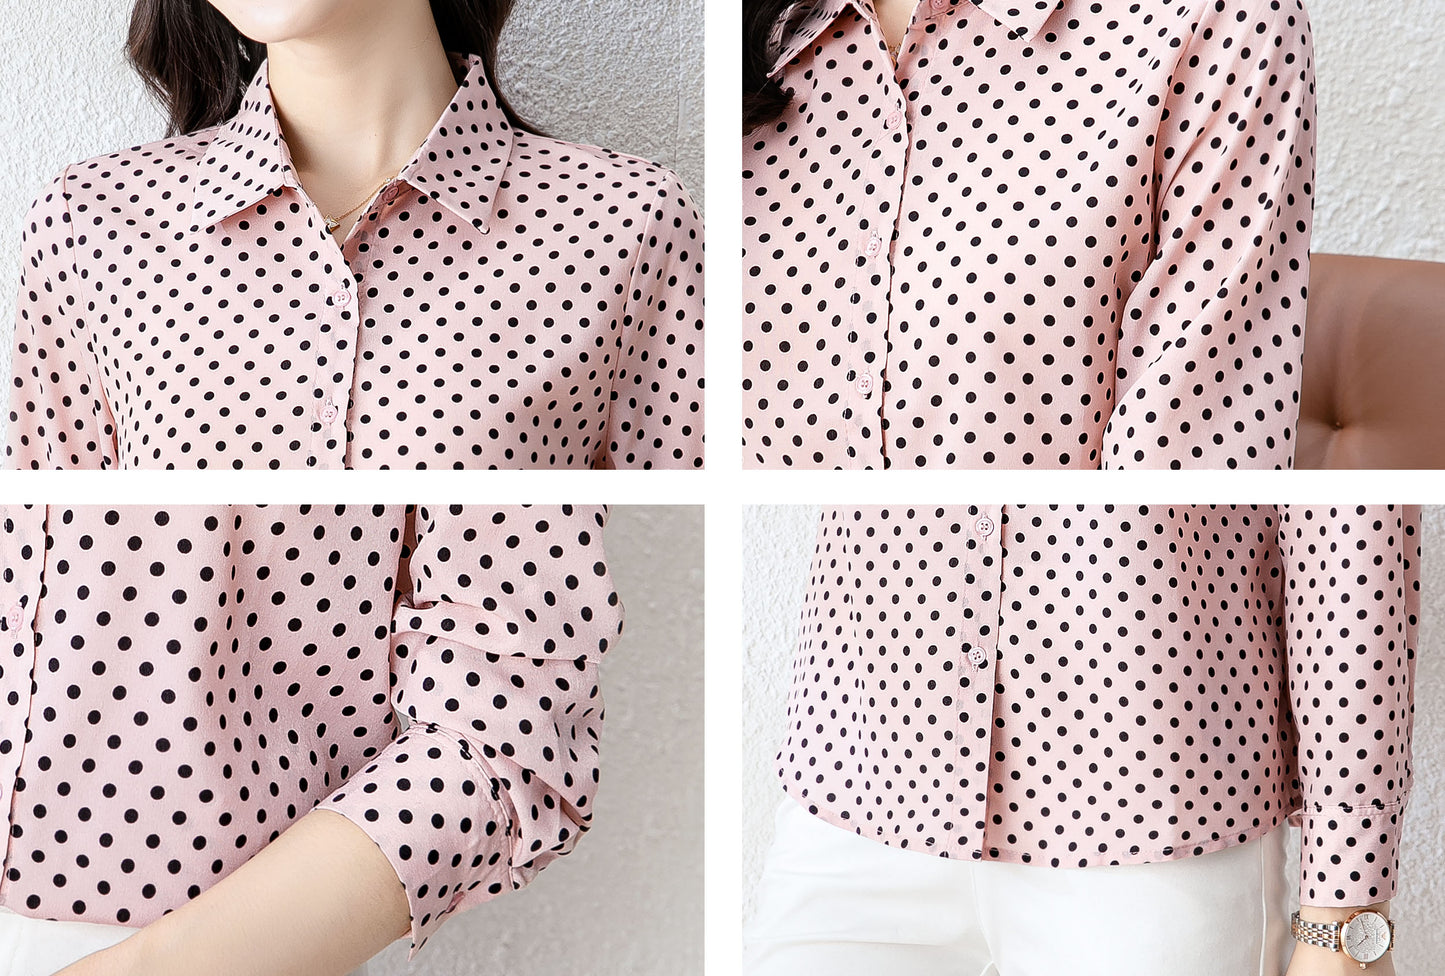 Pink Collared Neckline Spots Long Sleeves Blouse Top Shirt